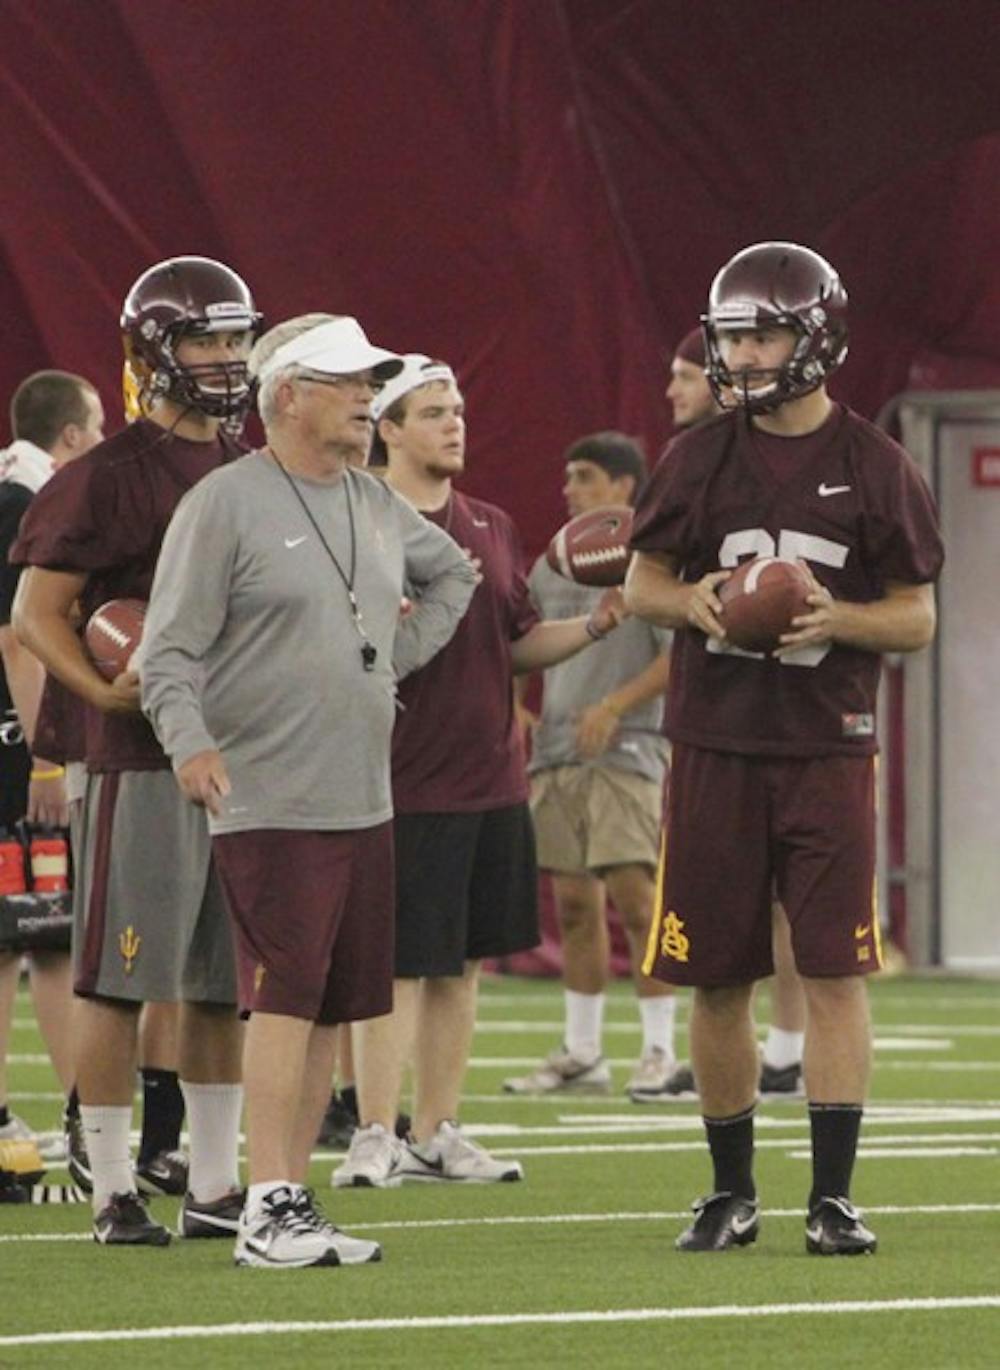 Shoes to fill: ASU redshirt freshman kicker Alex Garoutte talks to coach Dennis Erickson during practice on Wednesday. Garoutte has worked all summer and is ready to step into the kicking role filled last season by Thomas Weber. (Photo by Beth Easterbrook)